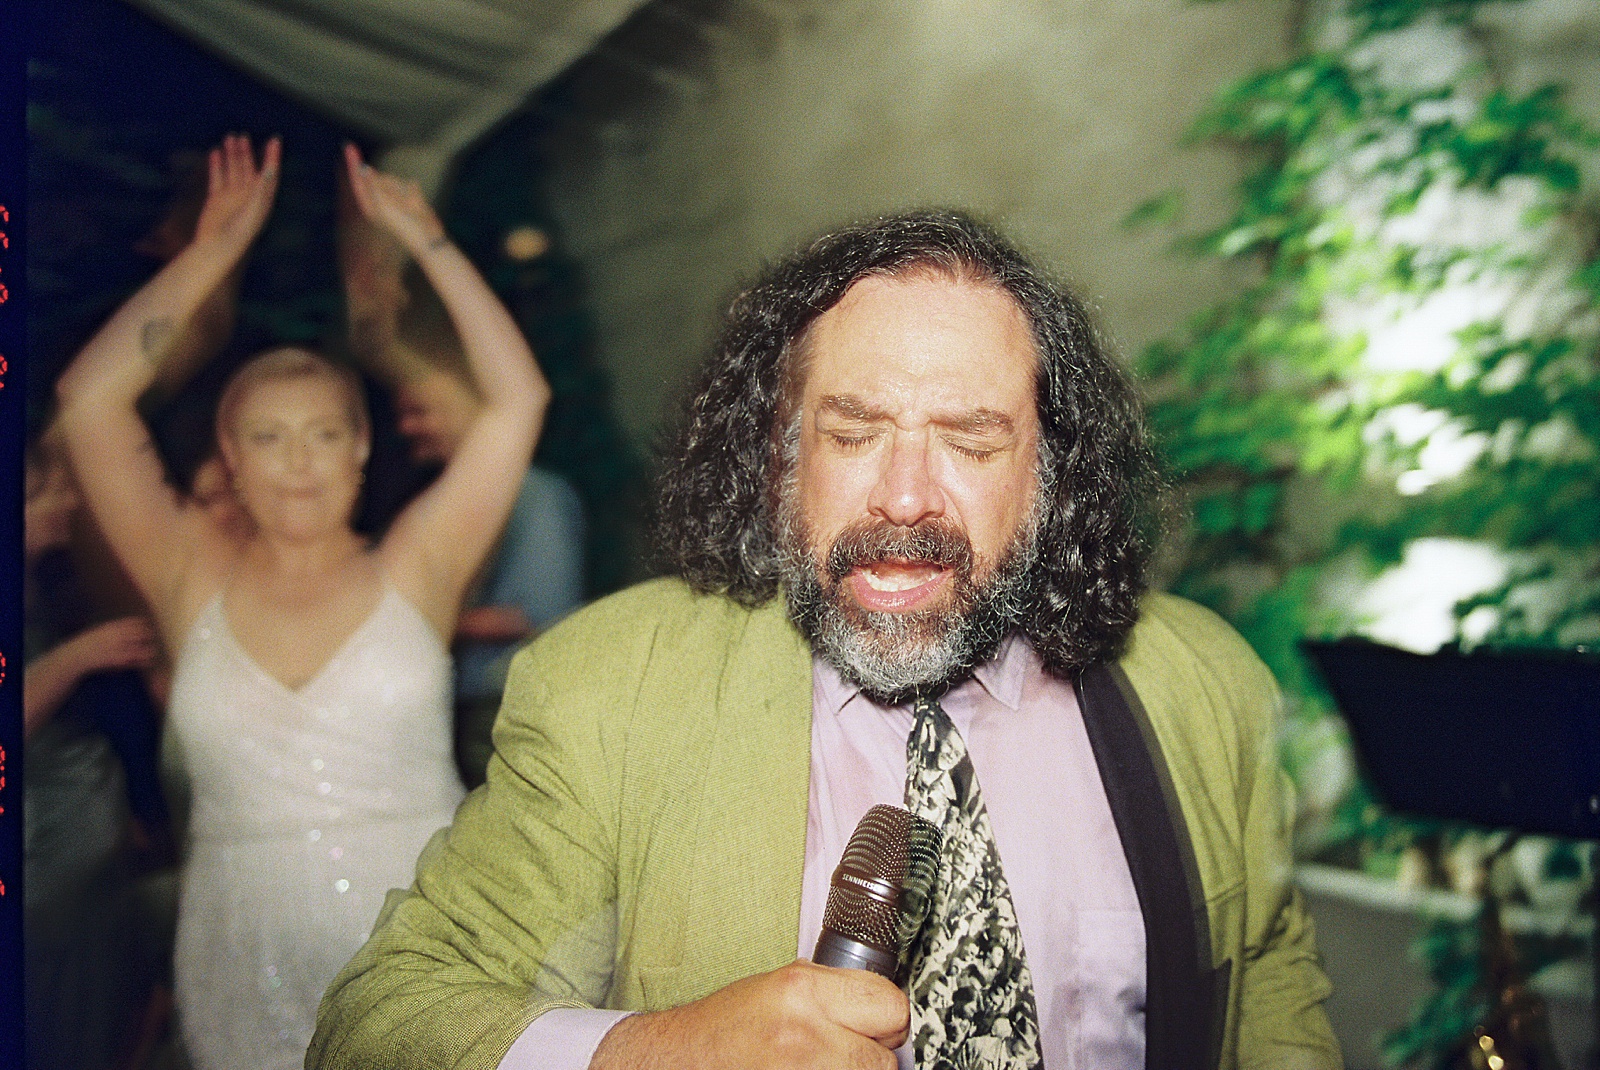 A wedding singer sings into a microphone while a bride dances behind him.